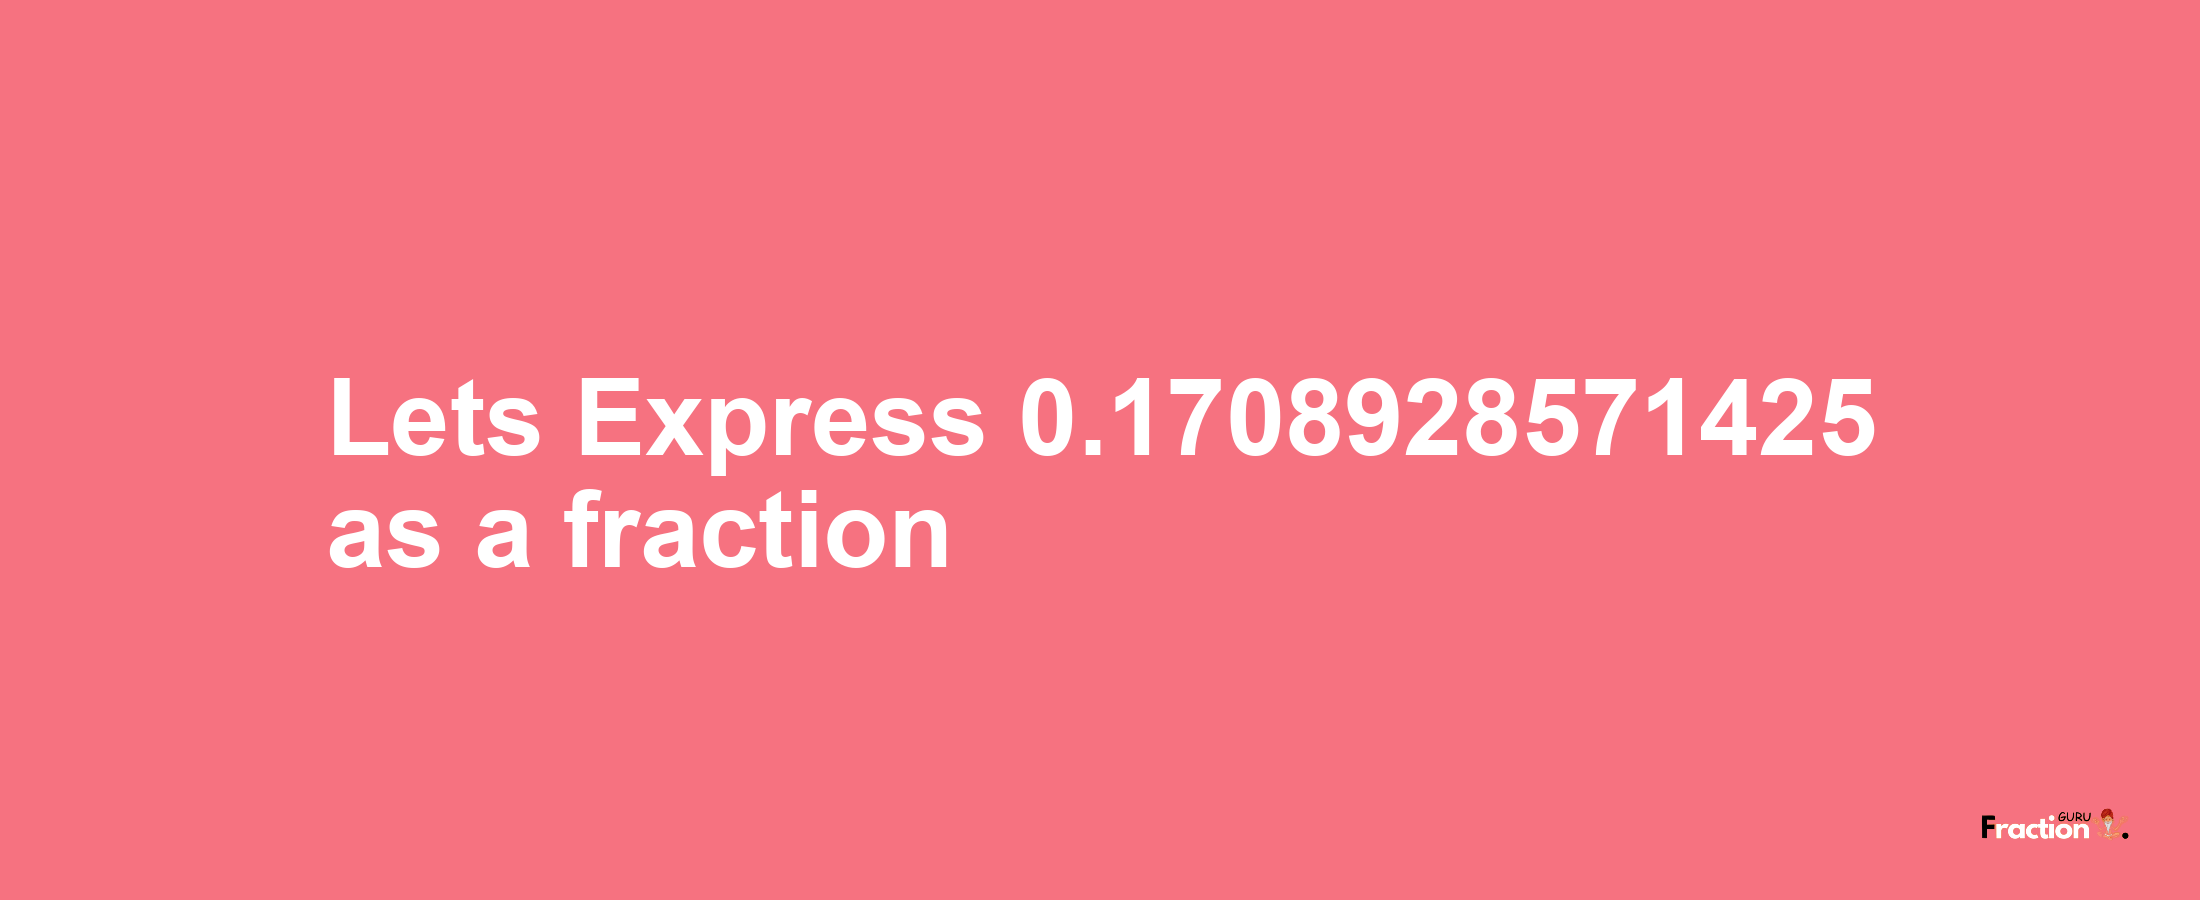 Lets Express 0.1708928571425 as afraction